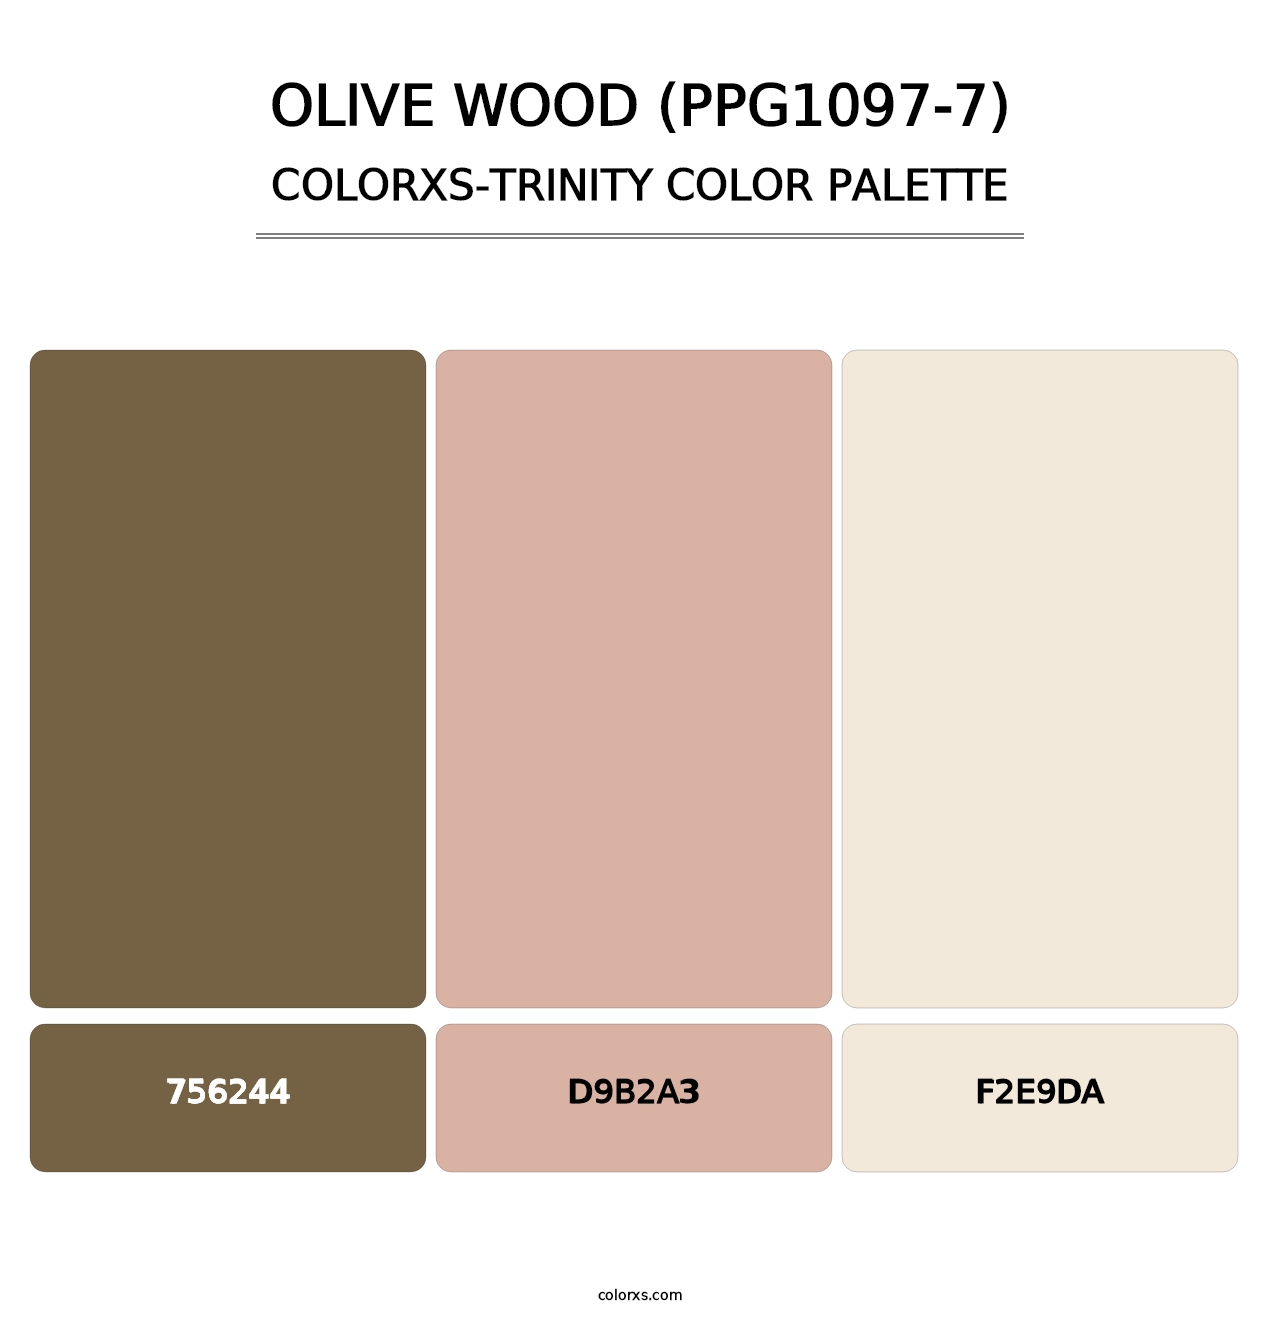 Olive Wood (PPG1097-7) - Colorxs Trinity Palette